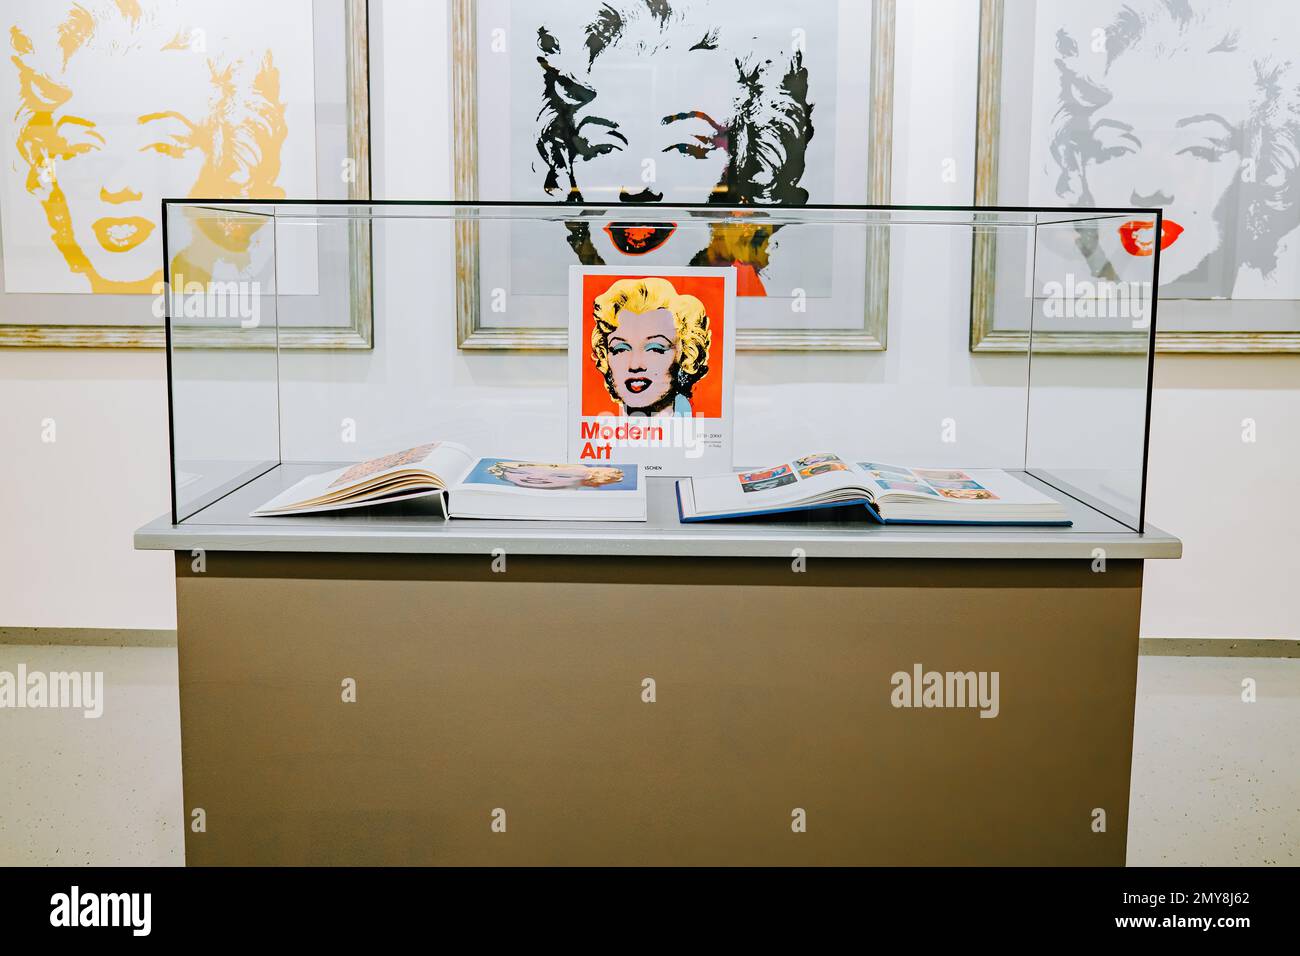 Andy Warhol exhibition in Central Gallery. Famous colorful Marilyn Monroe installation. Legend artist, painting, collection. High quality photo Stock Photo